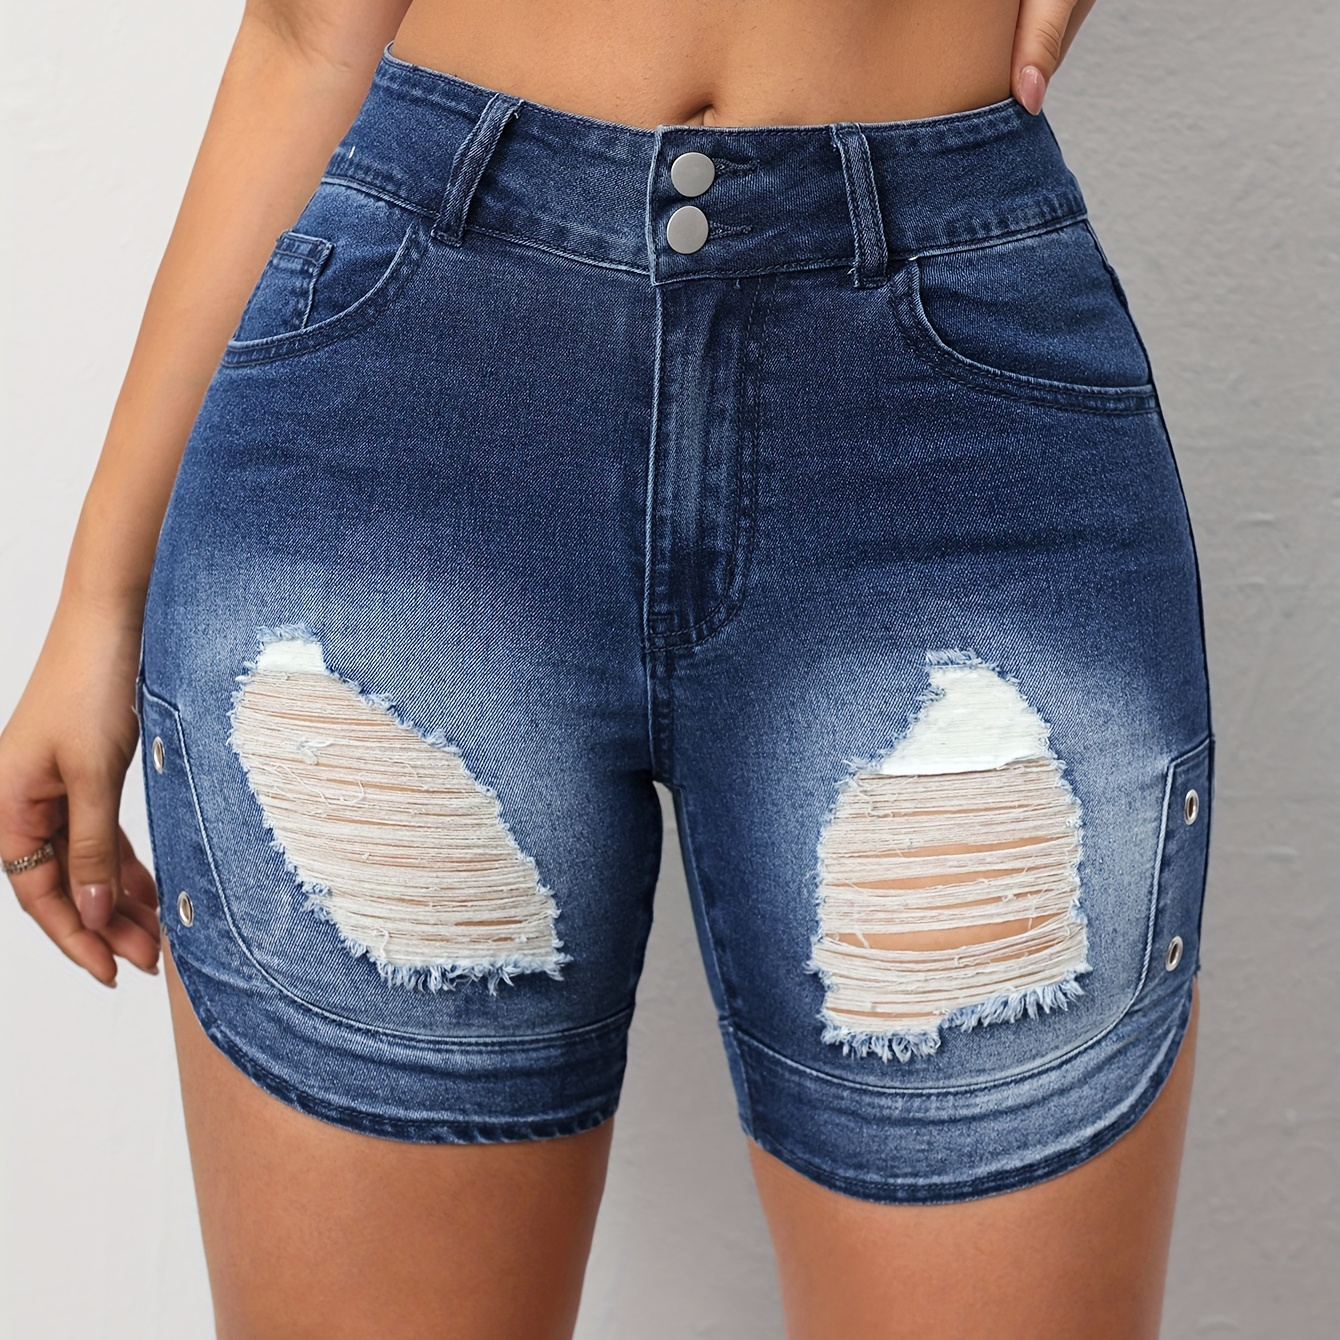 

Women's Casual Ripped Denim Shorts, High-waisted Distressed Side Eyelet Decor Jean Hotpants, Fashionable Summer Wear